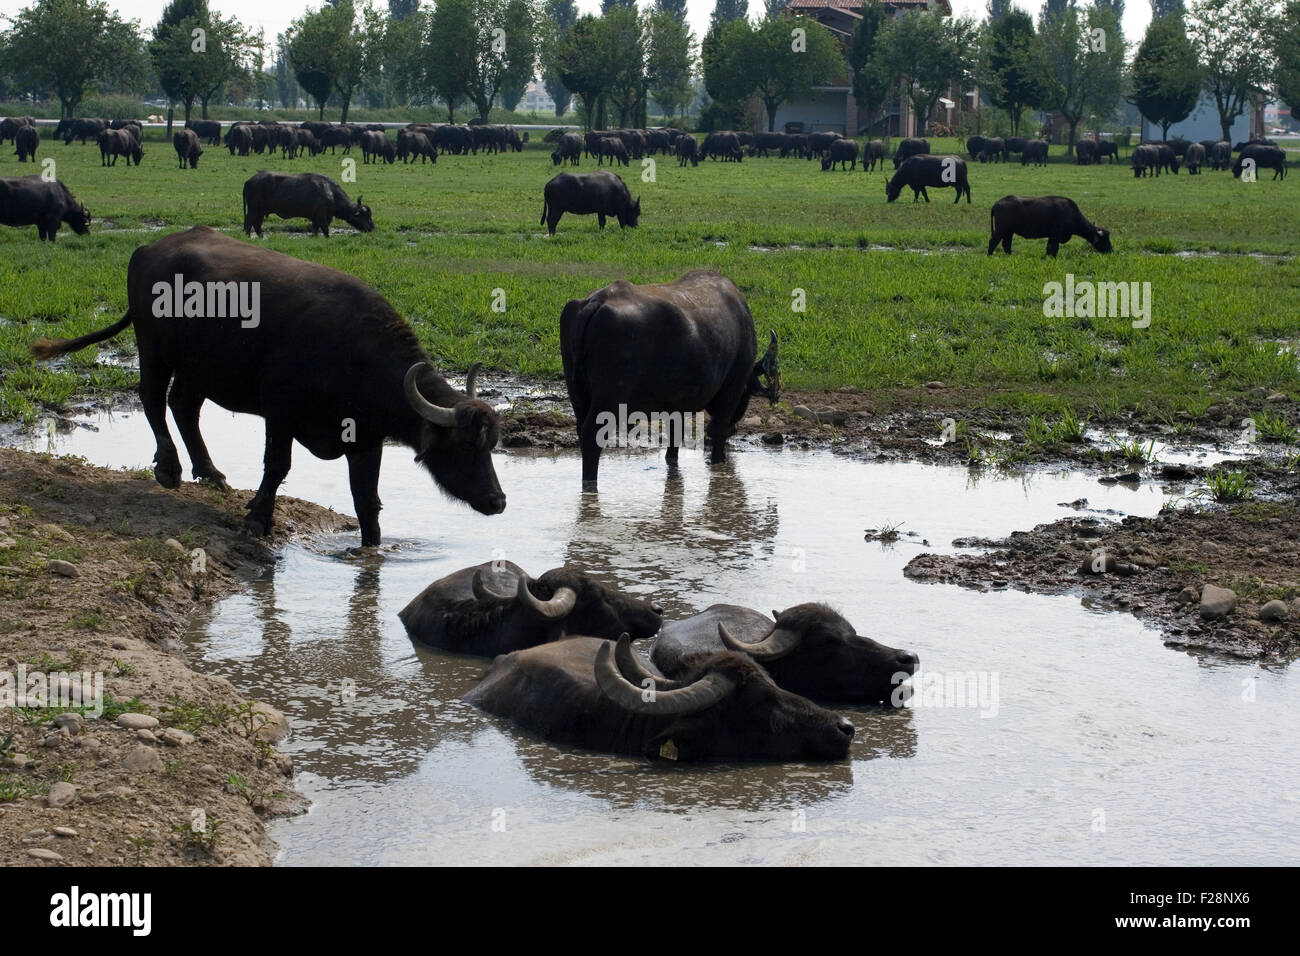 View of buffaloes in a muddy water Stock Photo